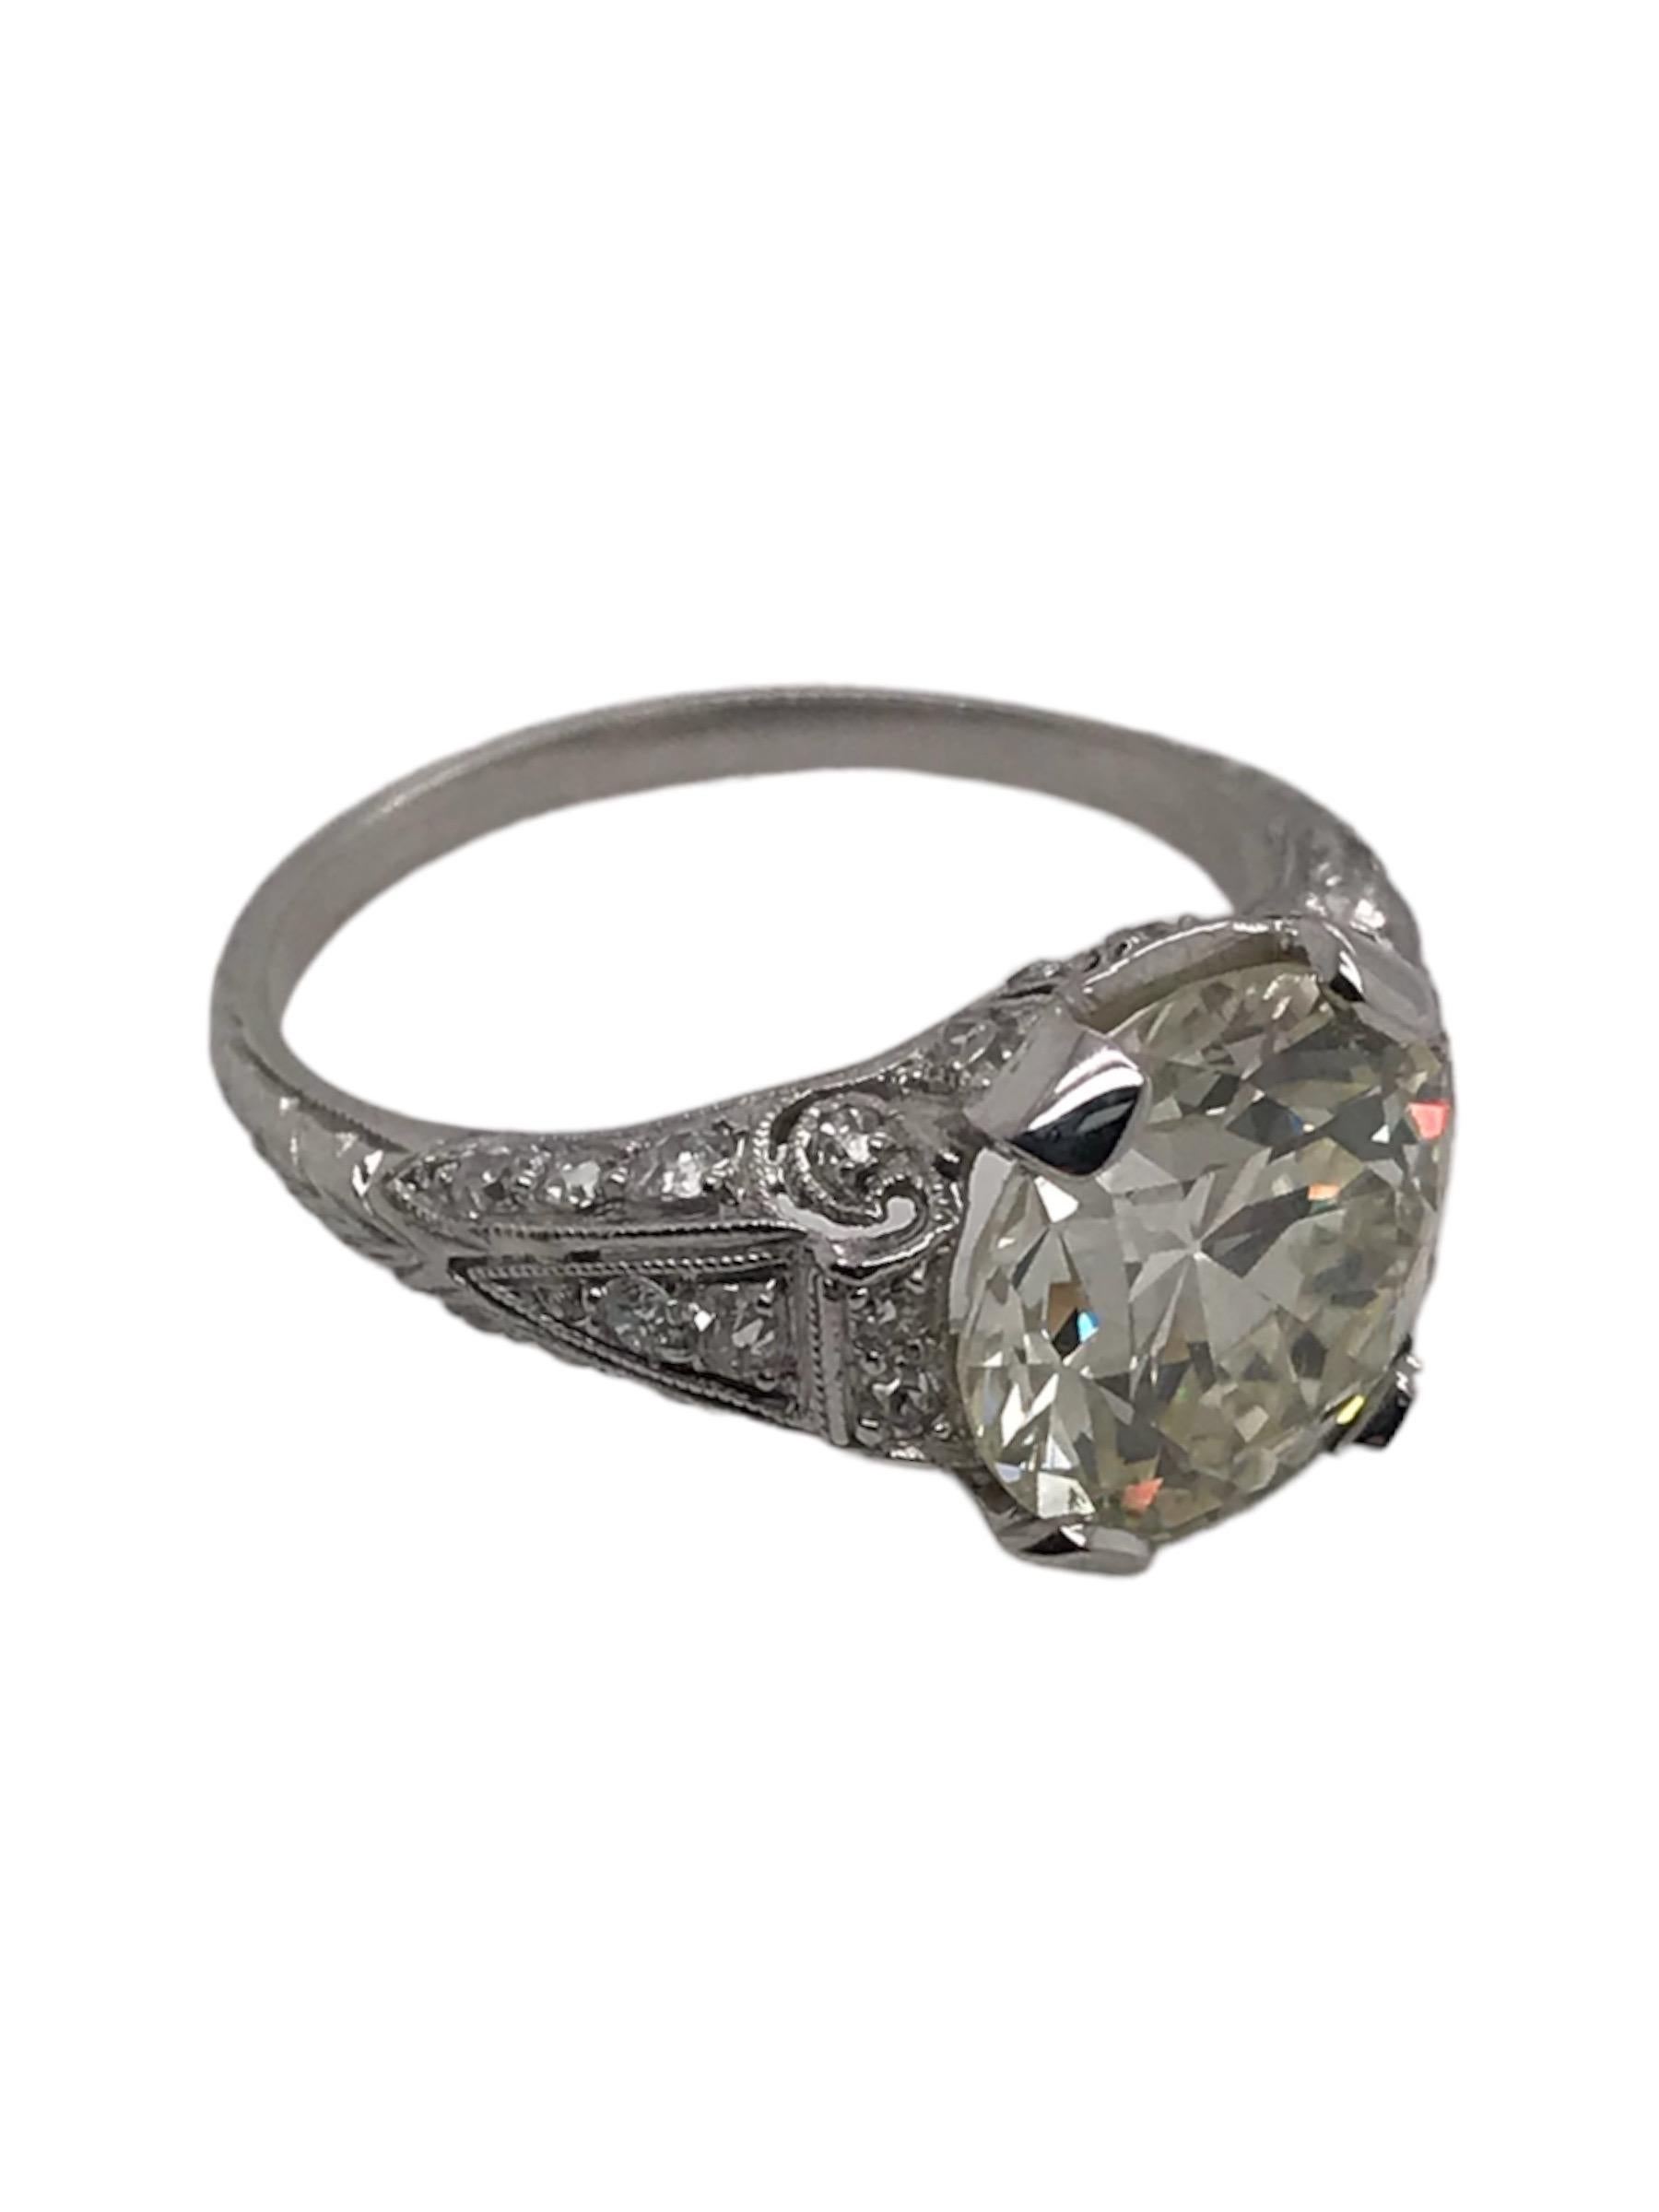 Some pieces words just can't describe!
This magnificent beauty was crafted in the Edwardian Era, known for the use of scroll work in designs from this period.
The ring features 38 stunning old single cut diamonds & excellent engraving